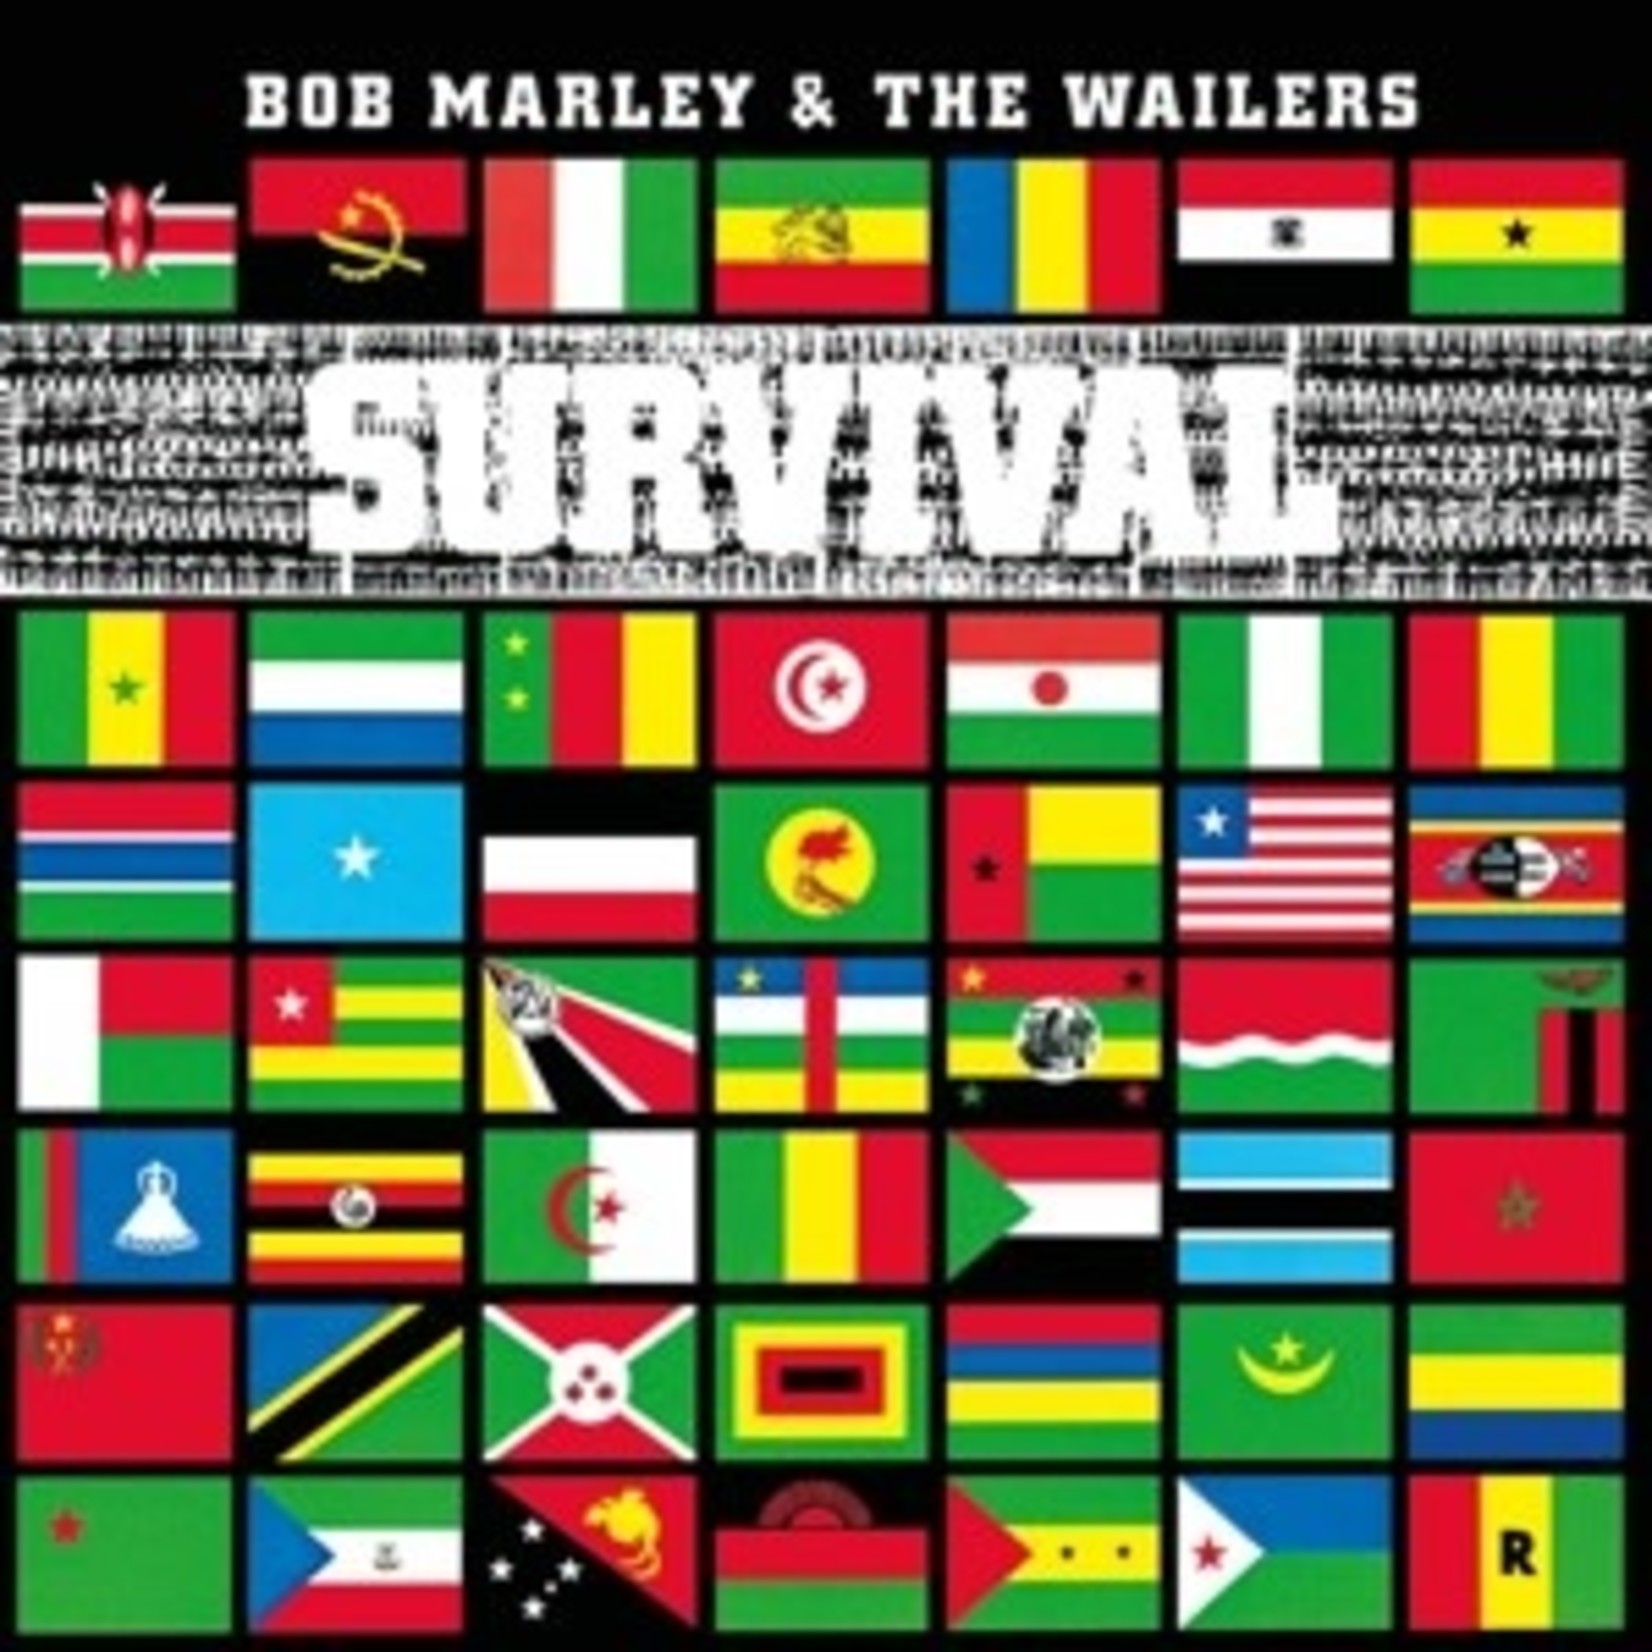 BOB MARLEY & THE WAILERS - SURVIVAL -REISSUE/LTD- LIMITED EDITION JAMAICAN TUFF GONG PRESSING  1LP